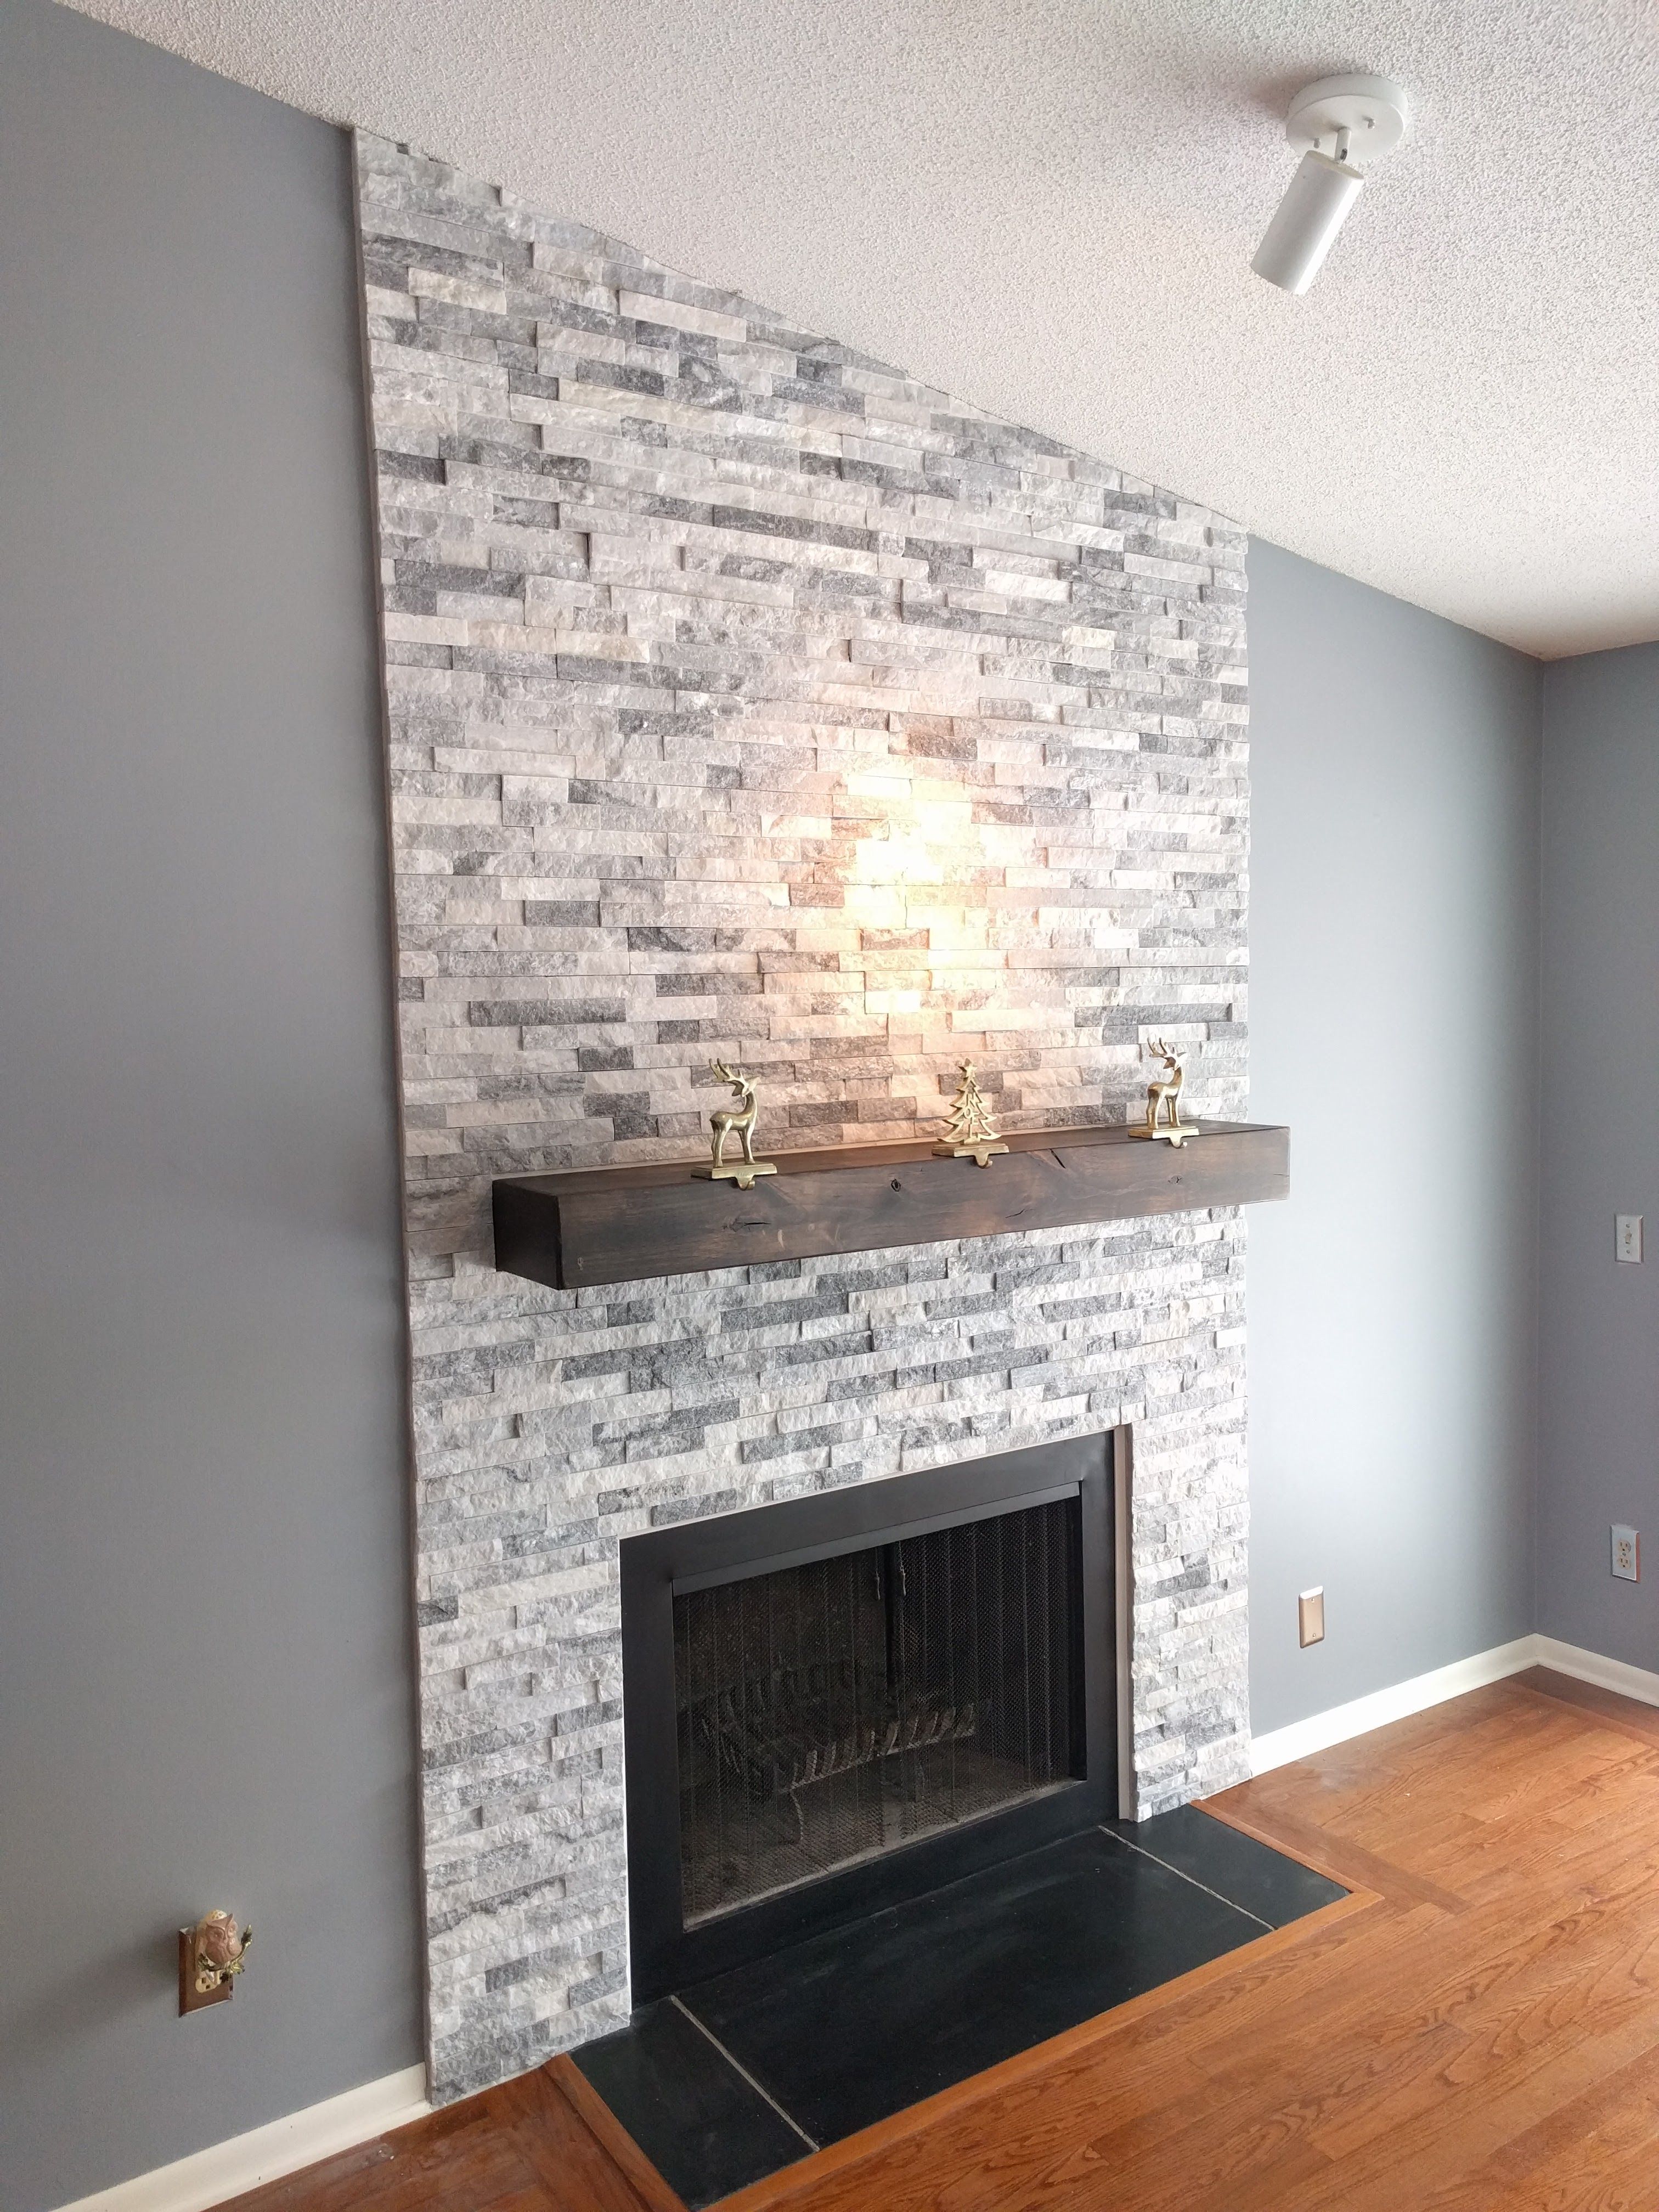 Stacked Stone Tile Fireplace Inspirational Living Room Stacked Stone Fireplace for Cool Living Room